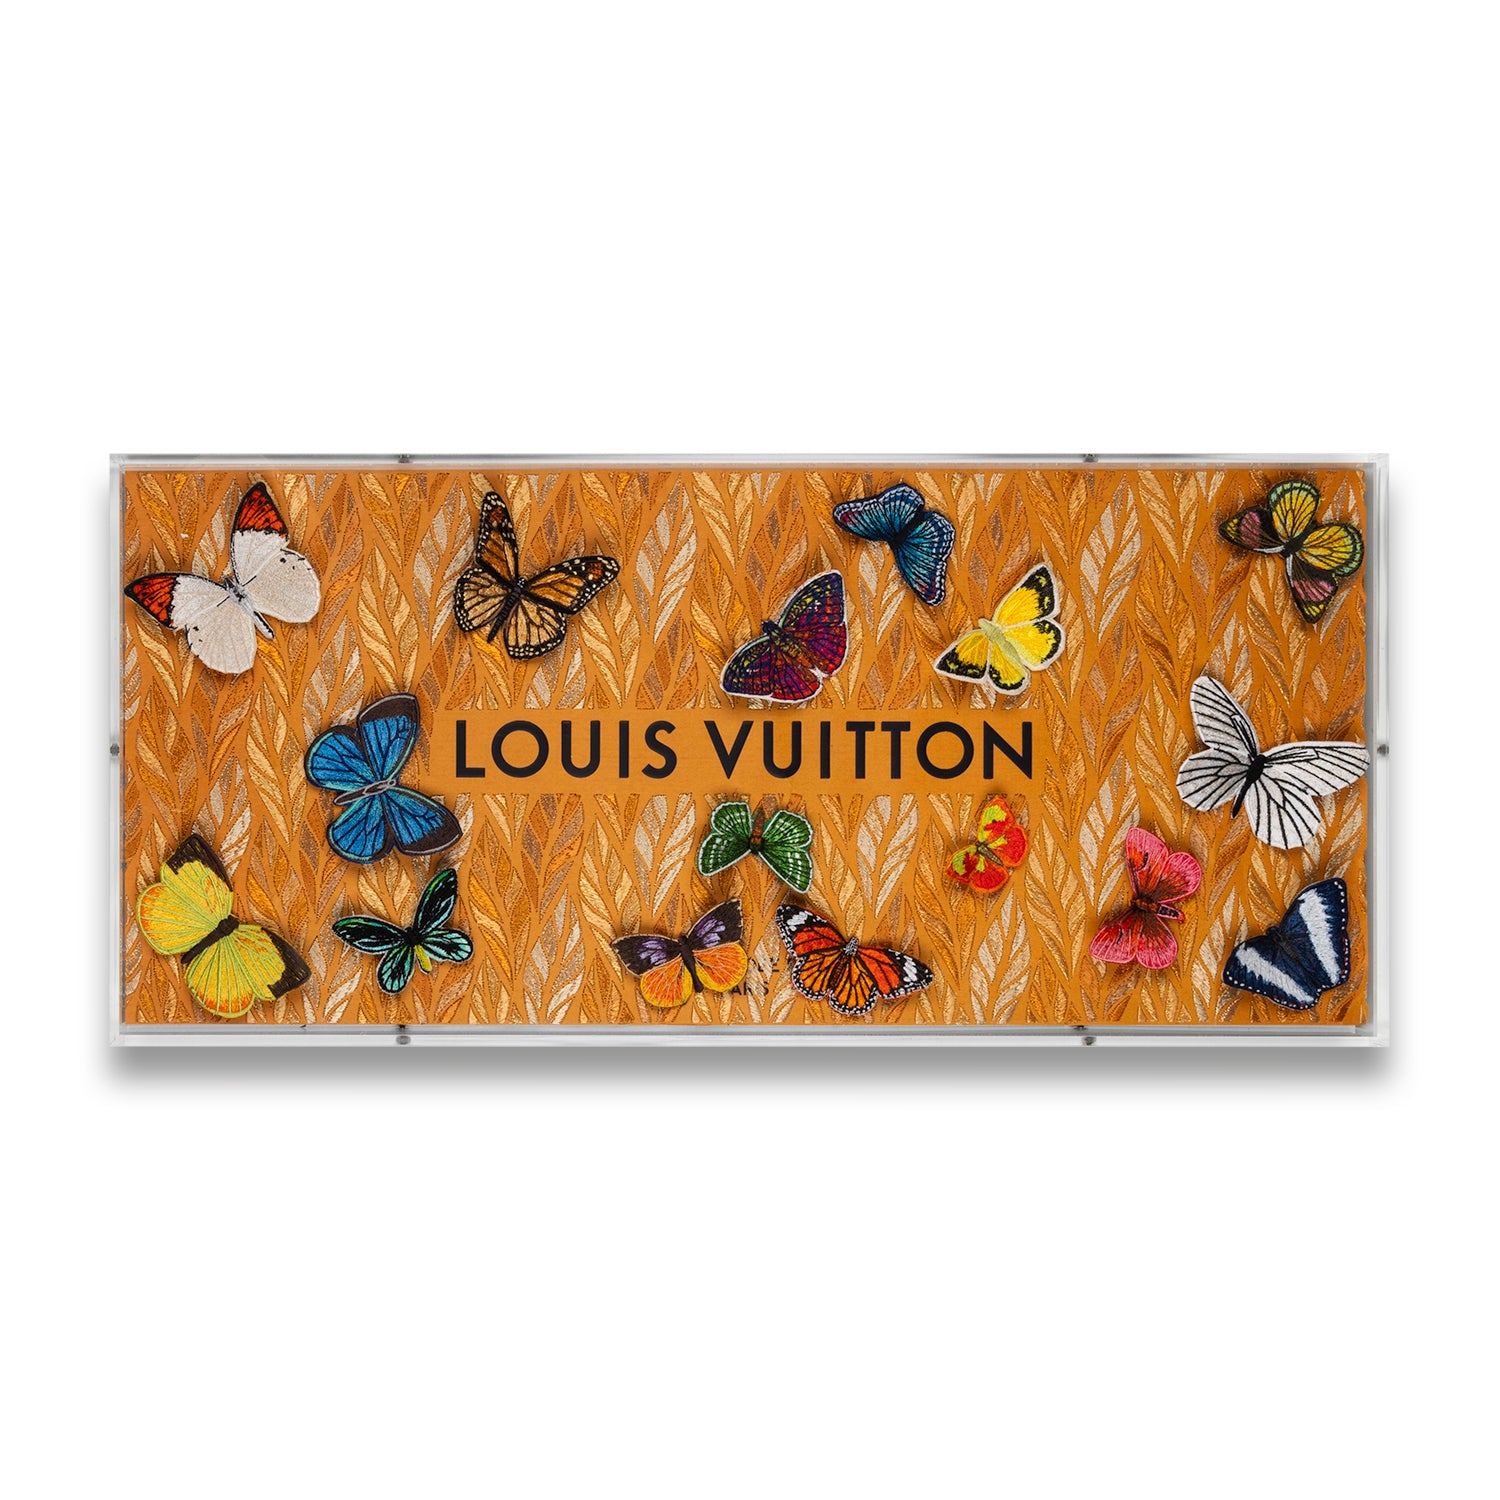 Louis Vuitton Butterfly Swarm Various (Double) by Stephen Wilson (26x12x2")